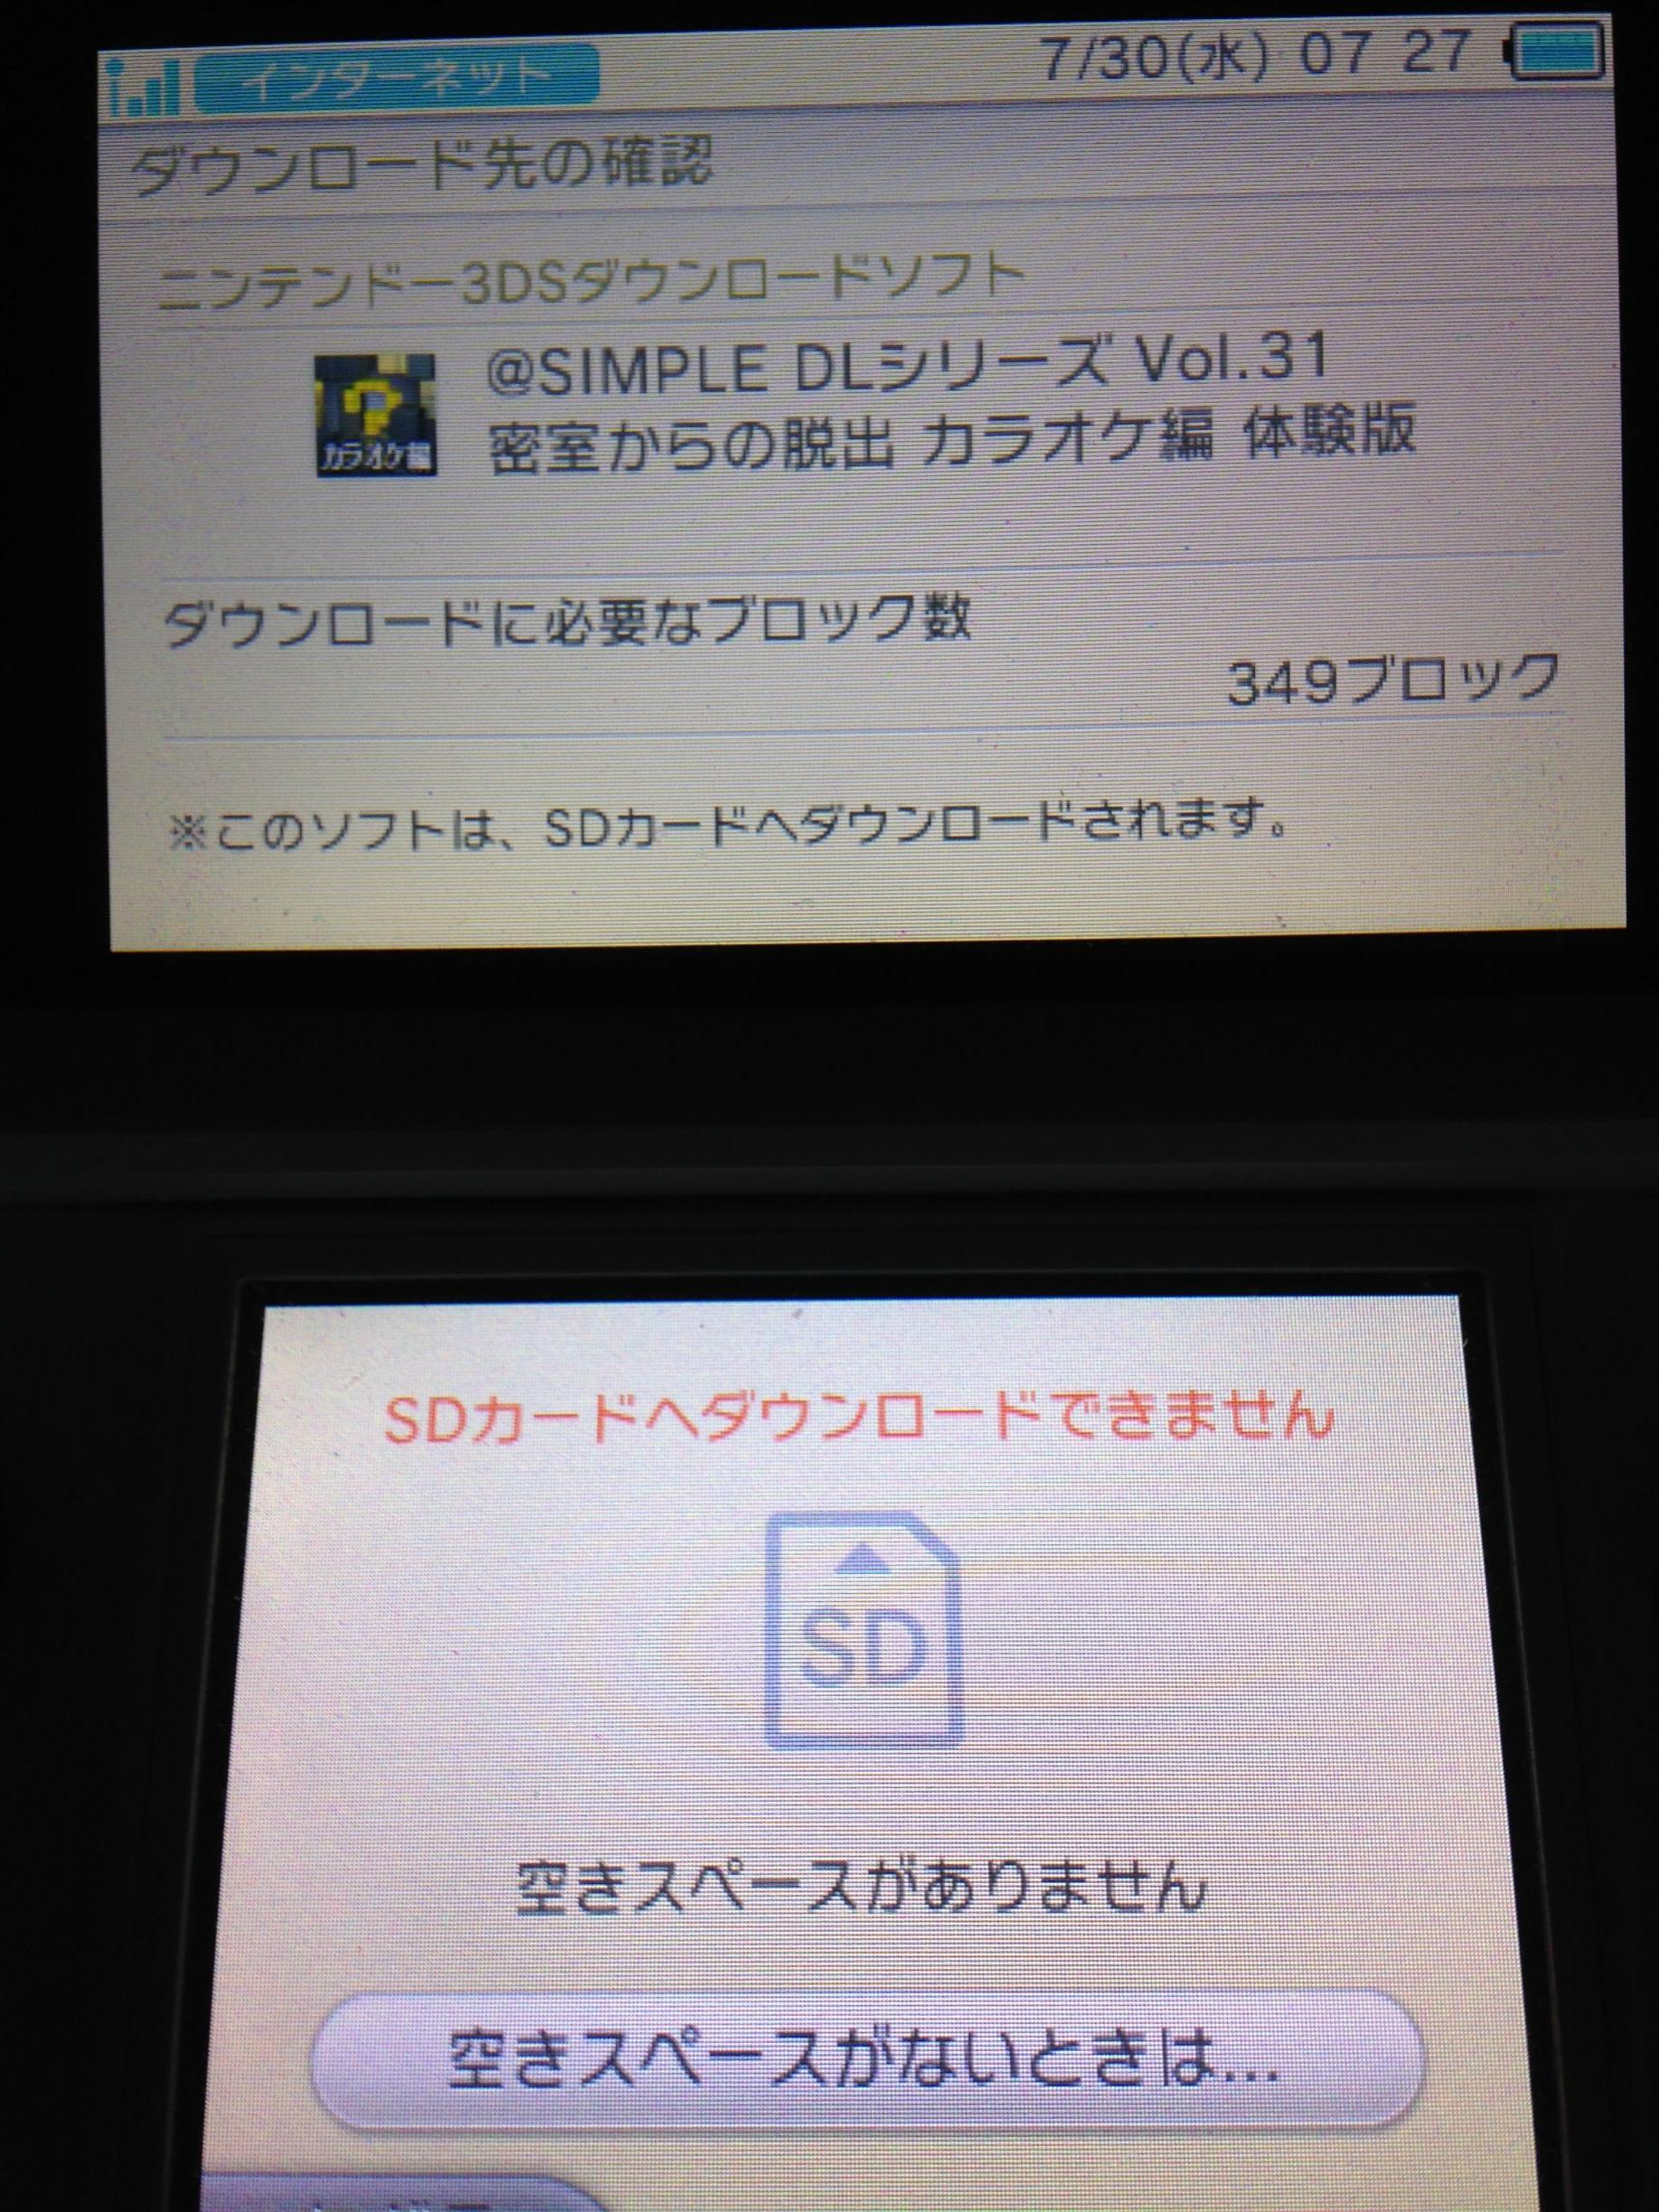 3ds Only Supports 300 Installed Apps At Once